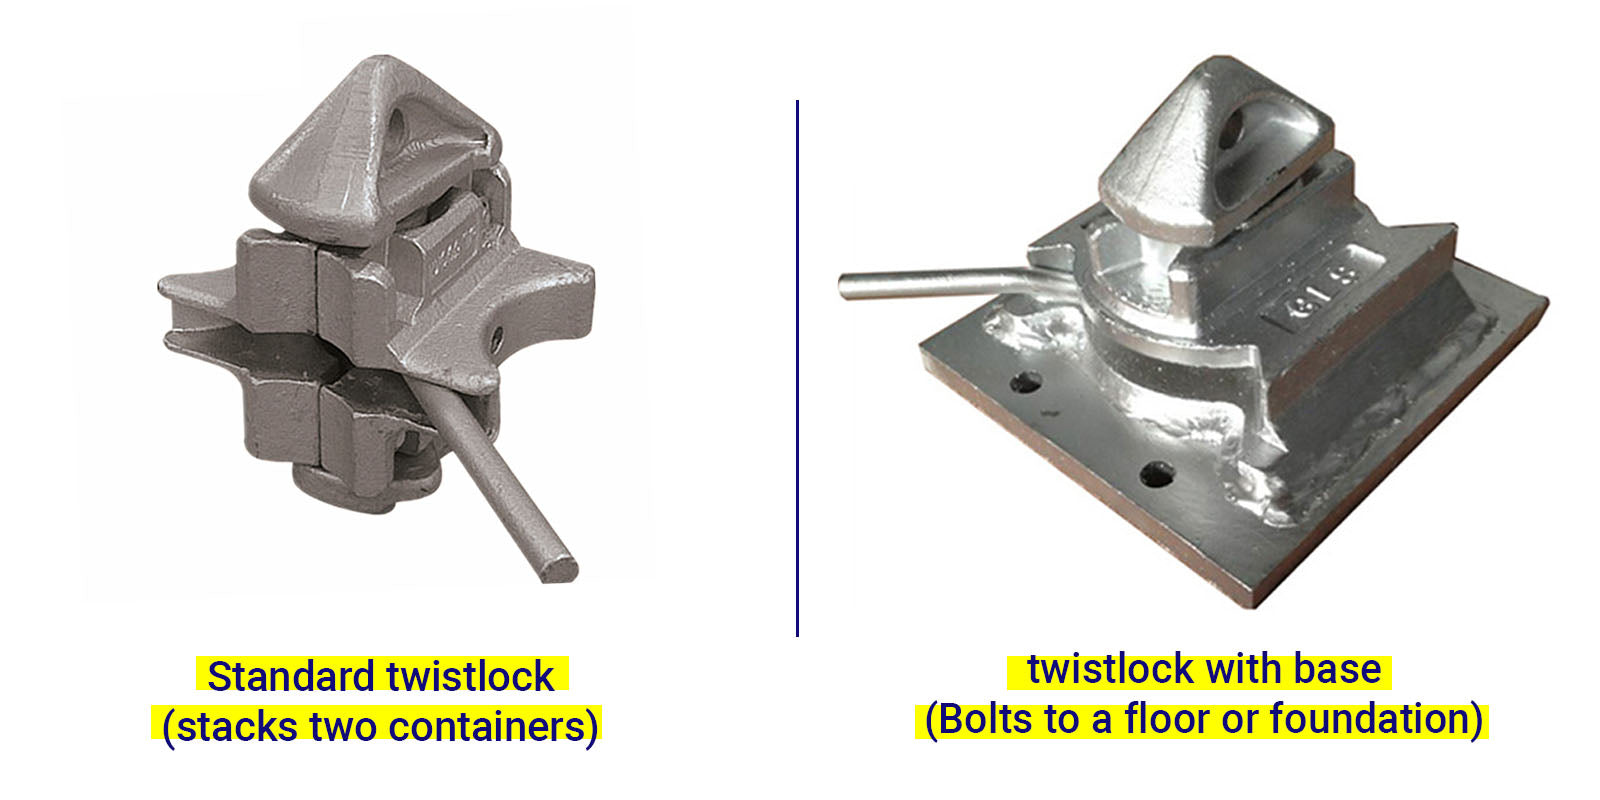 Shipping Container Twist Locks